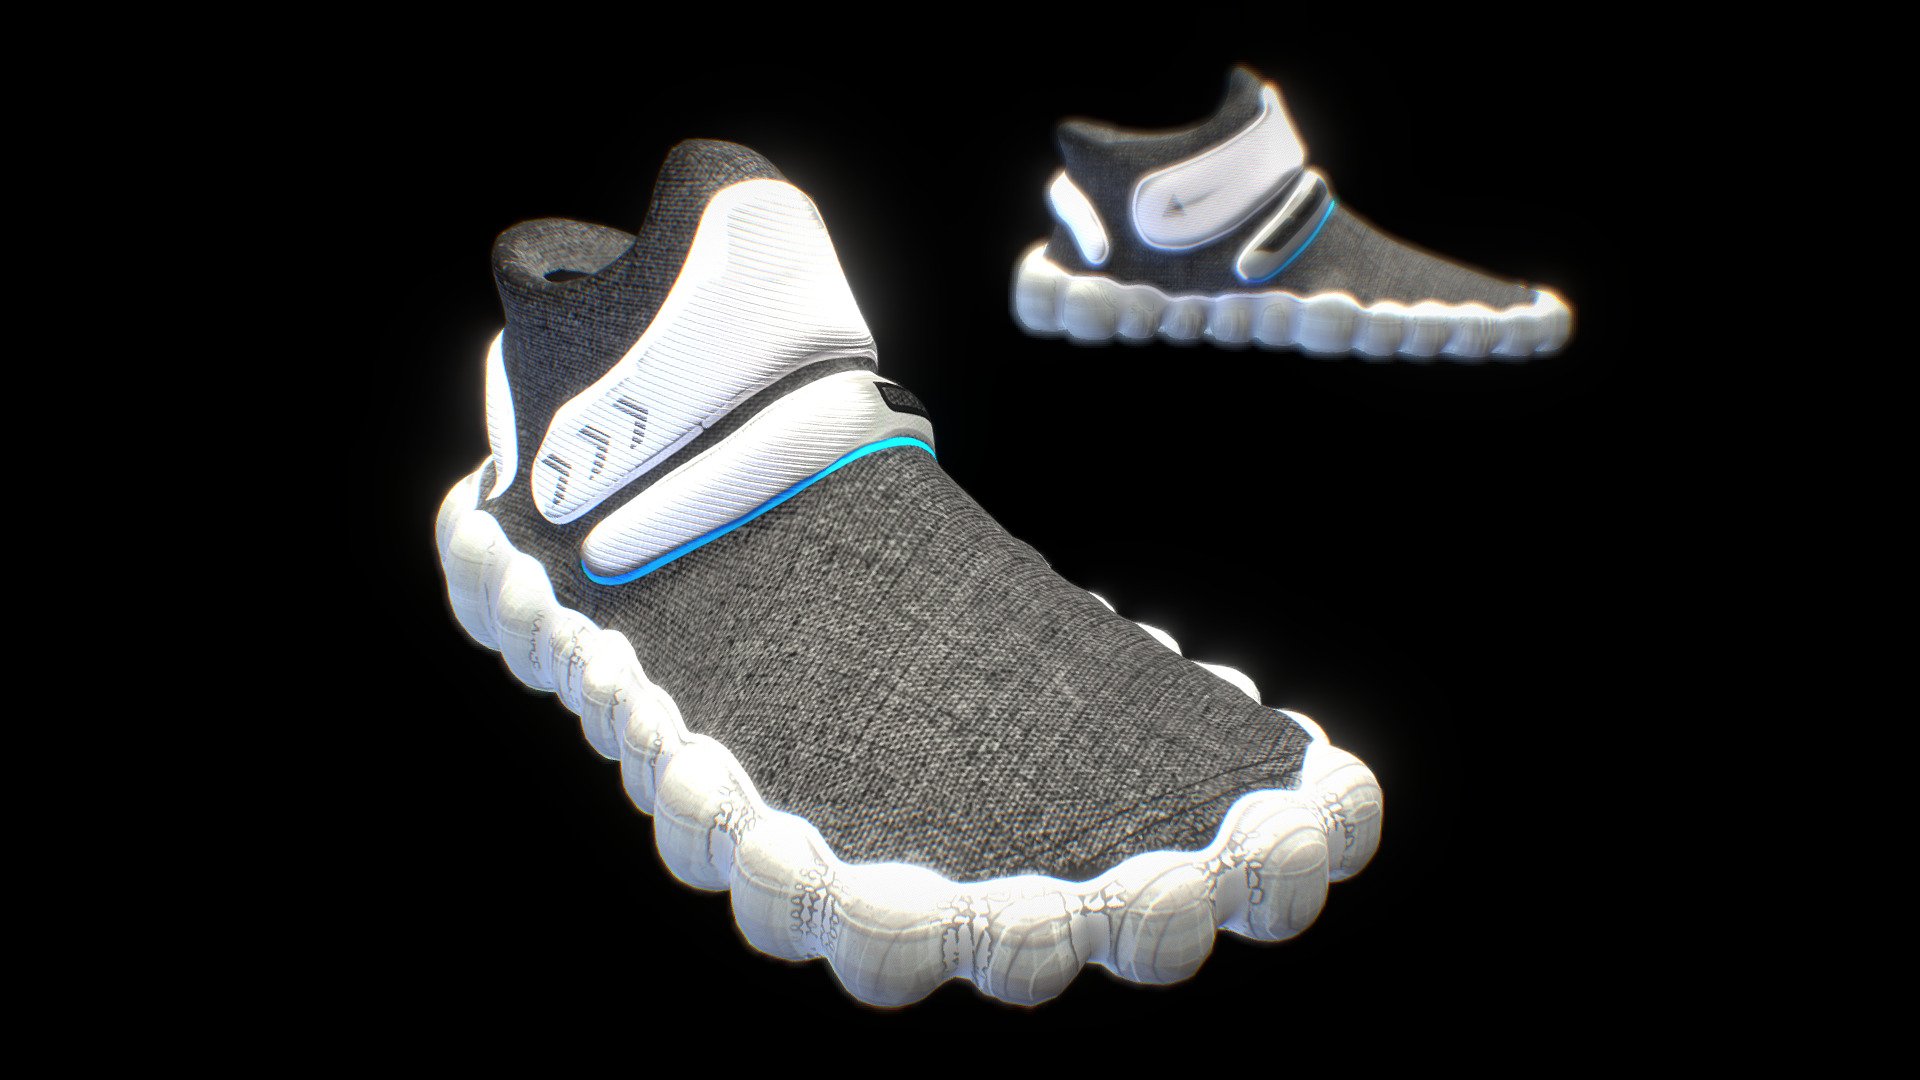 Made in 3D Coat
Quad mesh
Digital painting in 3D Coat
PBR Textures ( 4096 px )

by Lucid Dreams visuals

www.luciddreamsvisuals.com.ar - Sport Sneakers - Buy Royalty Free 3D model by LD3D (@vjluciddreams) 3d model